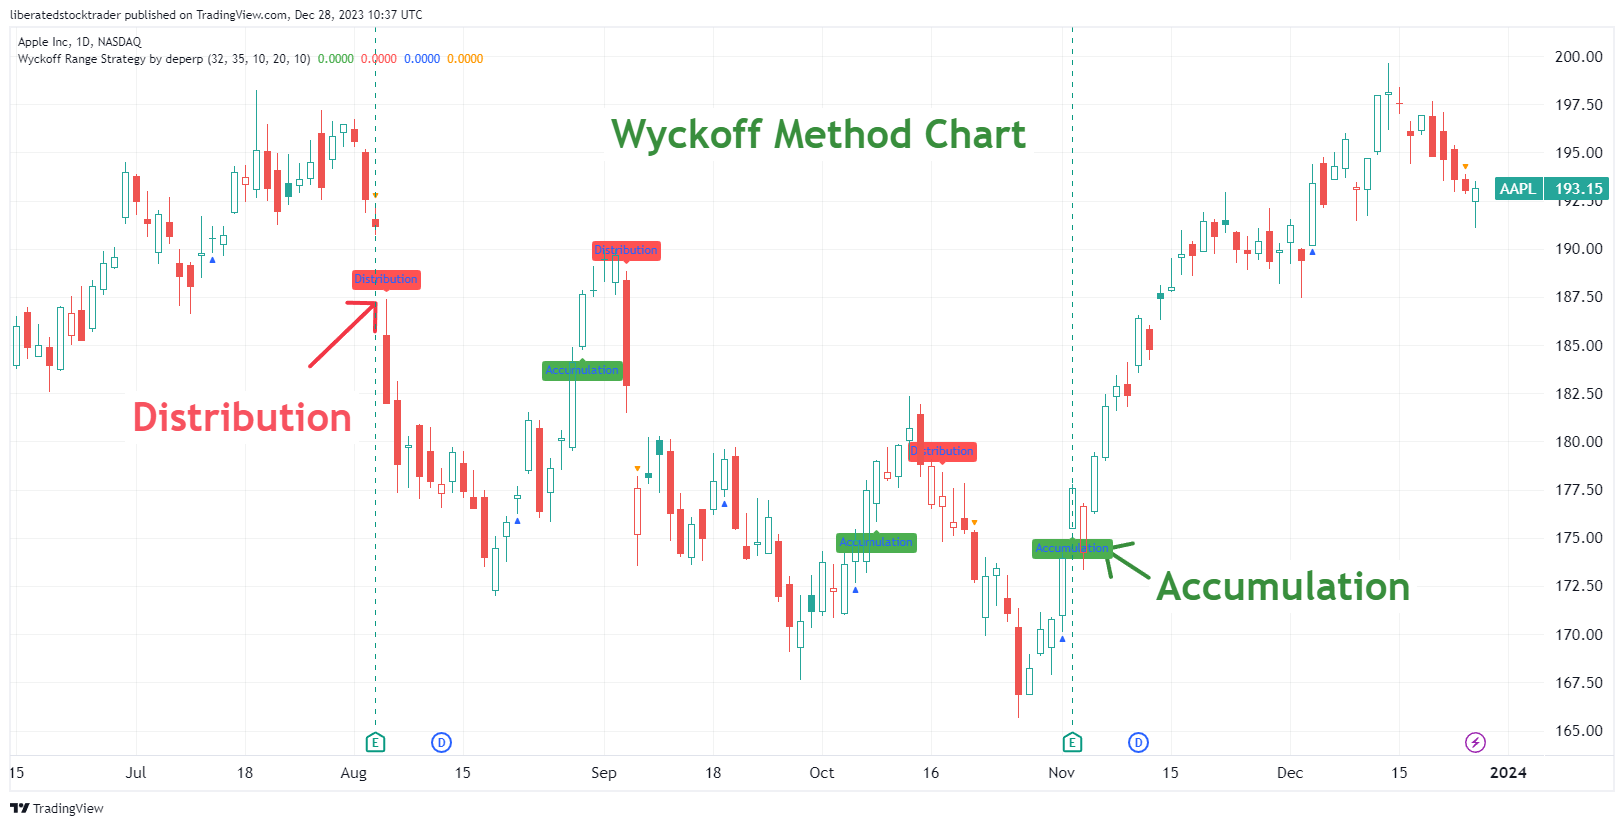 Accumulation and Distribution in the Wyckoff Method